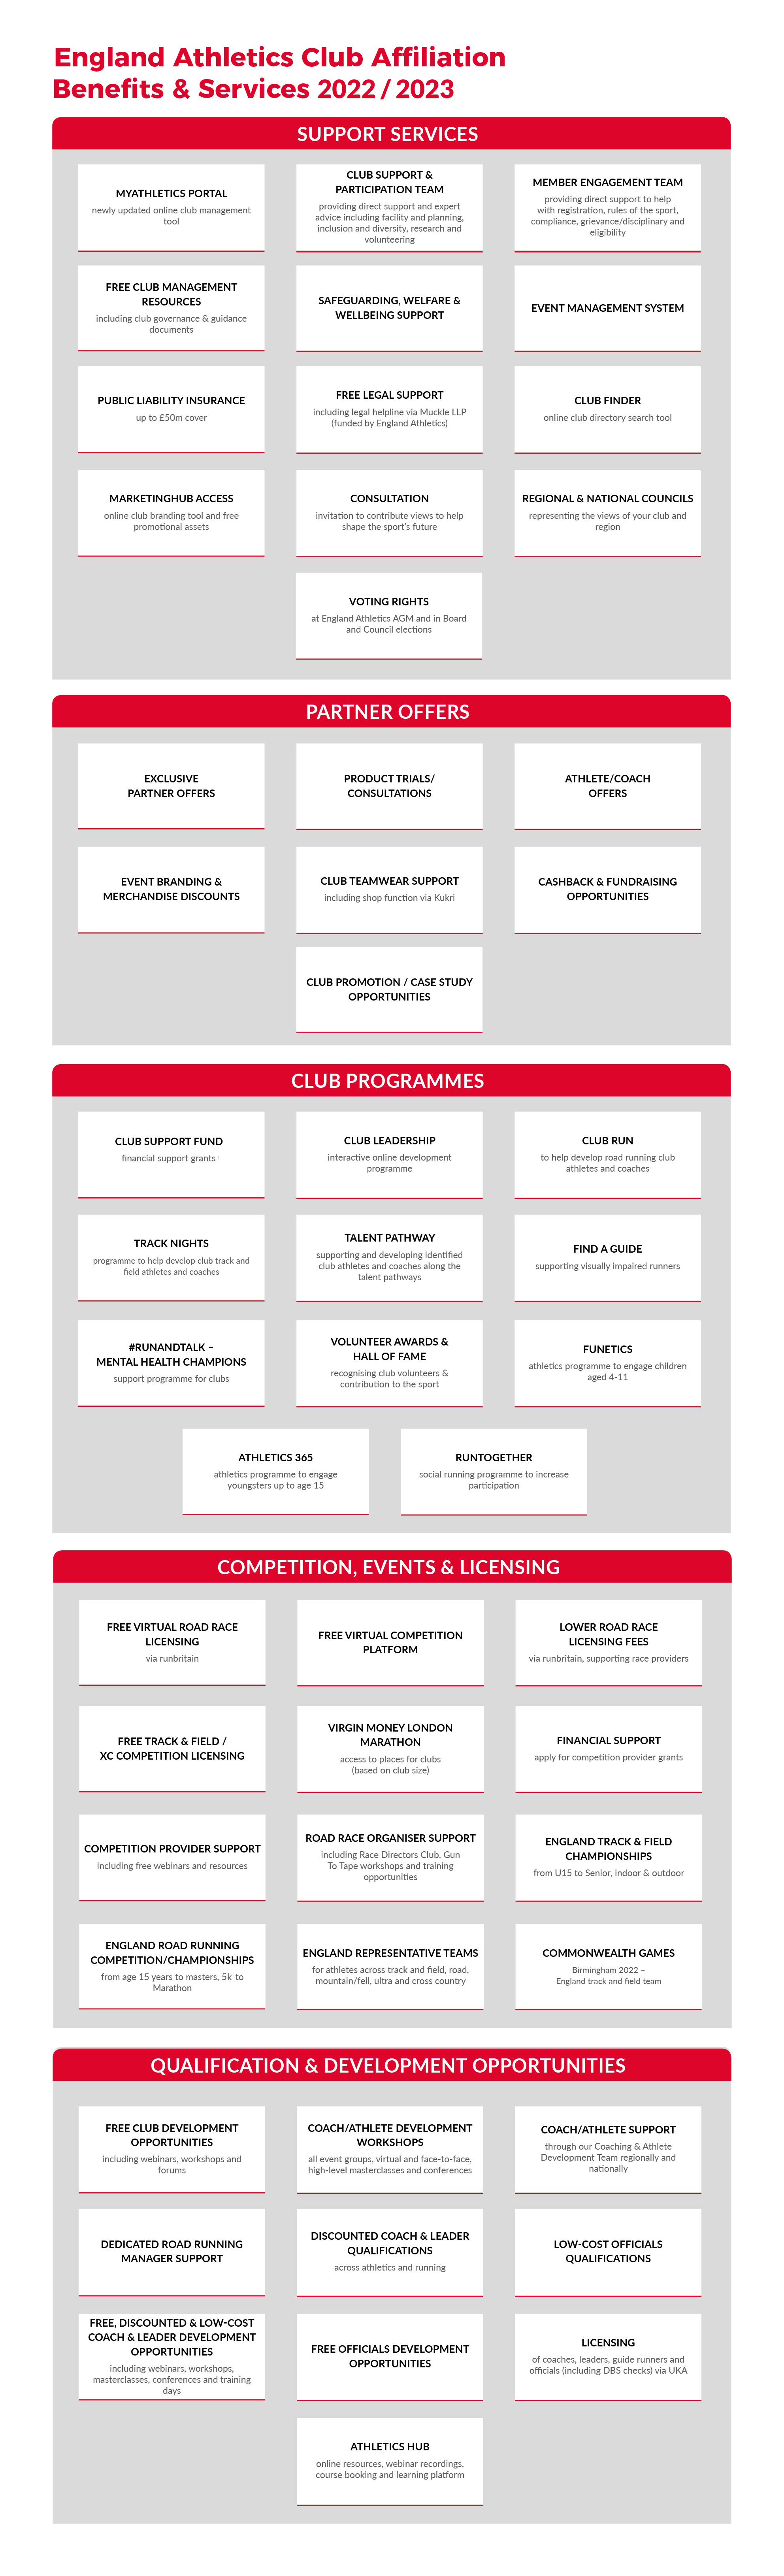 England Athletics Club Affiliation benefits and services chart 2022 / 2023